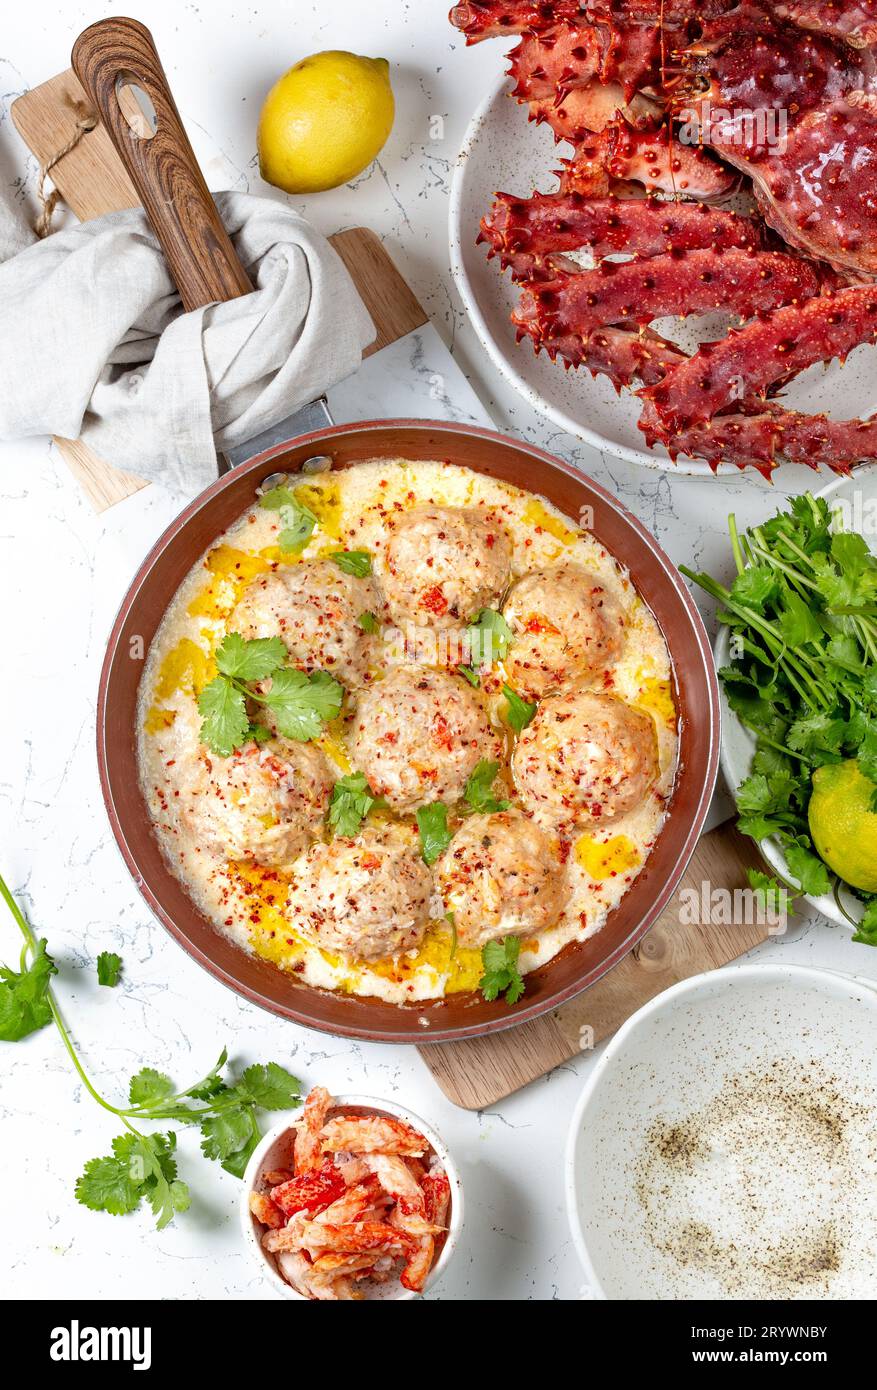 CRABMEATBALLS crab meatballs in white creamy sauce in red pan, whole king crab, cilantro, lemon and white wine on white backgrou Stock Photo